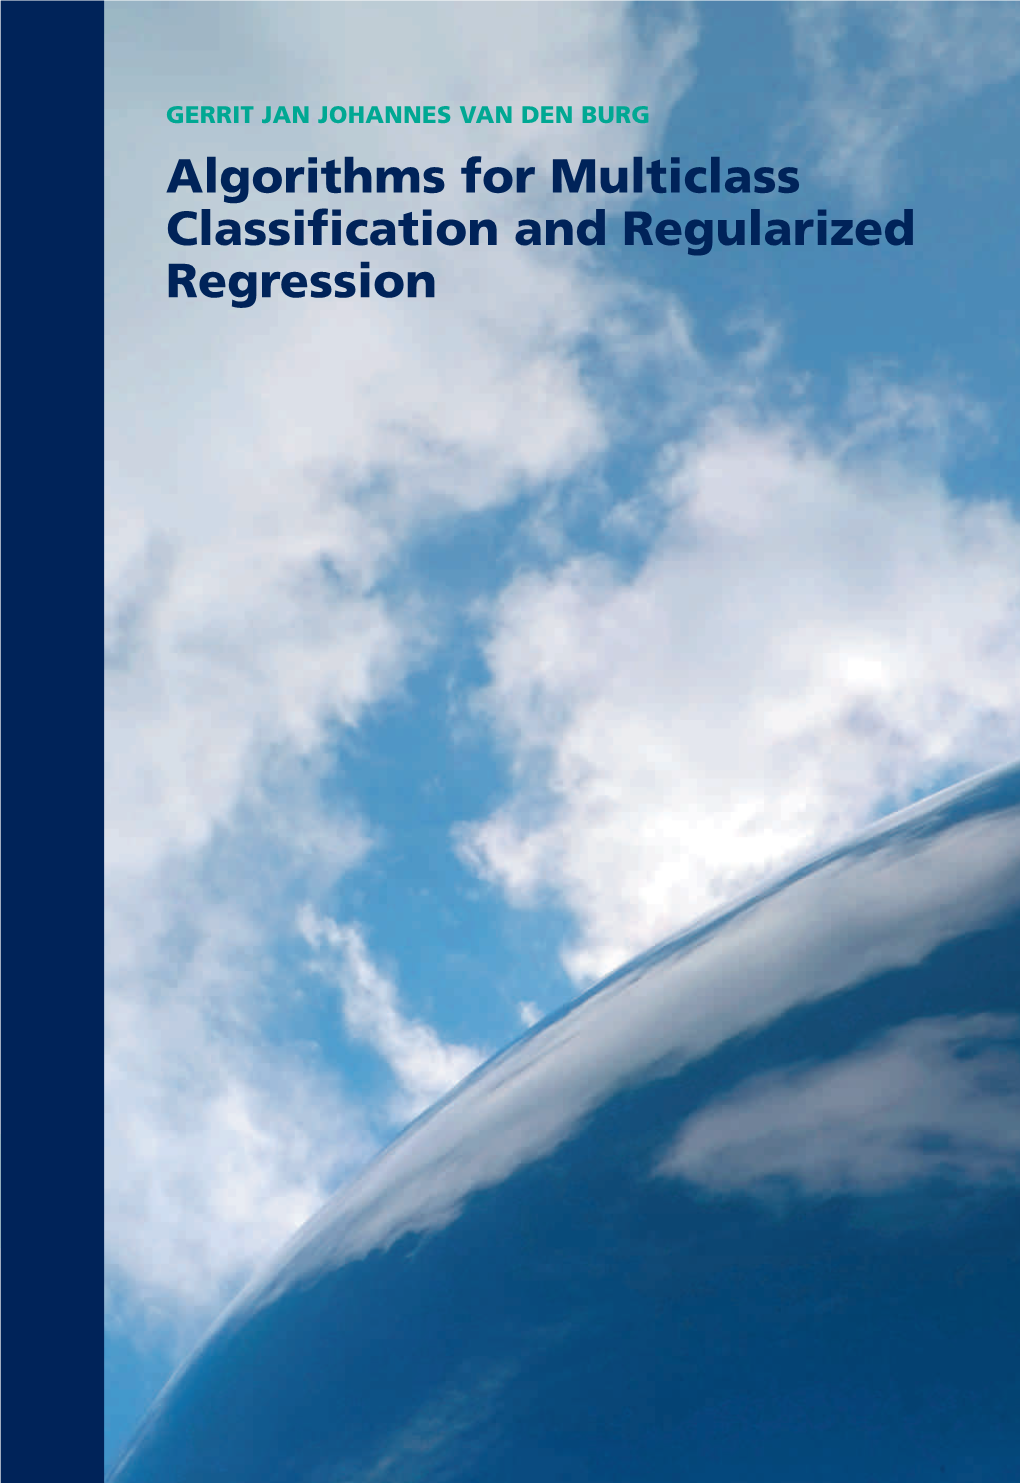 Algorithms for Multiclass Classification and Regularized Regression